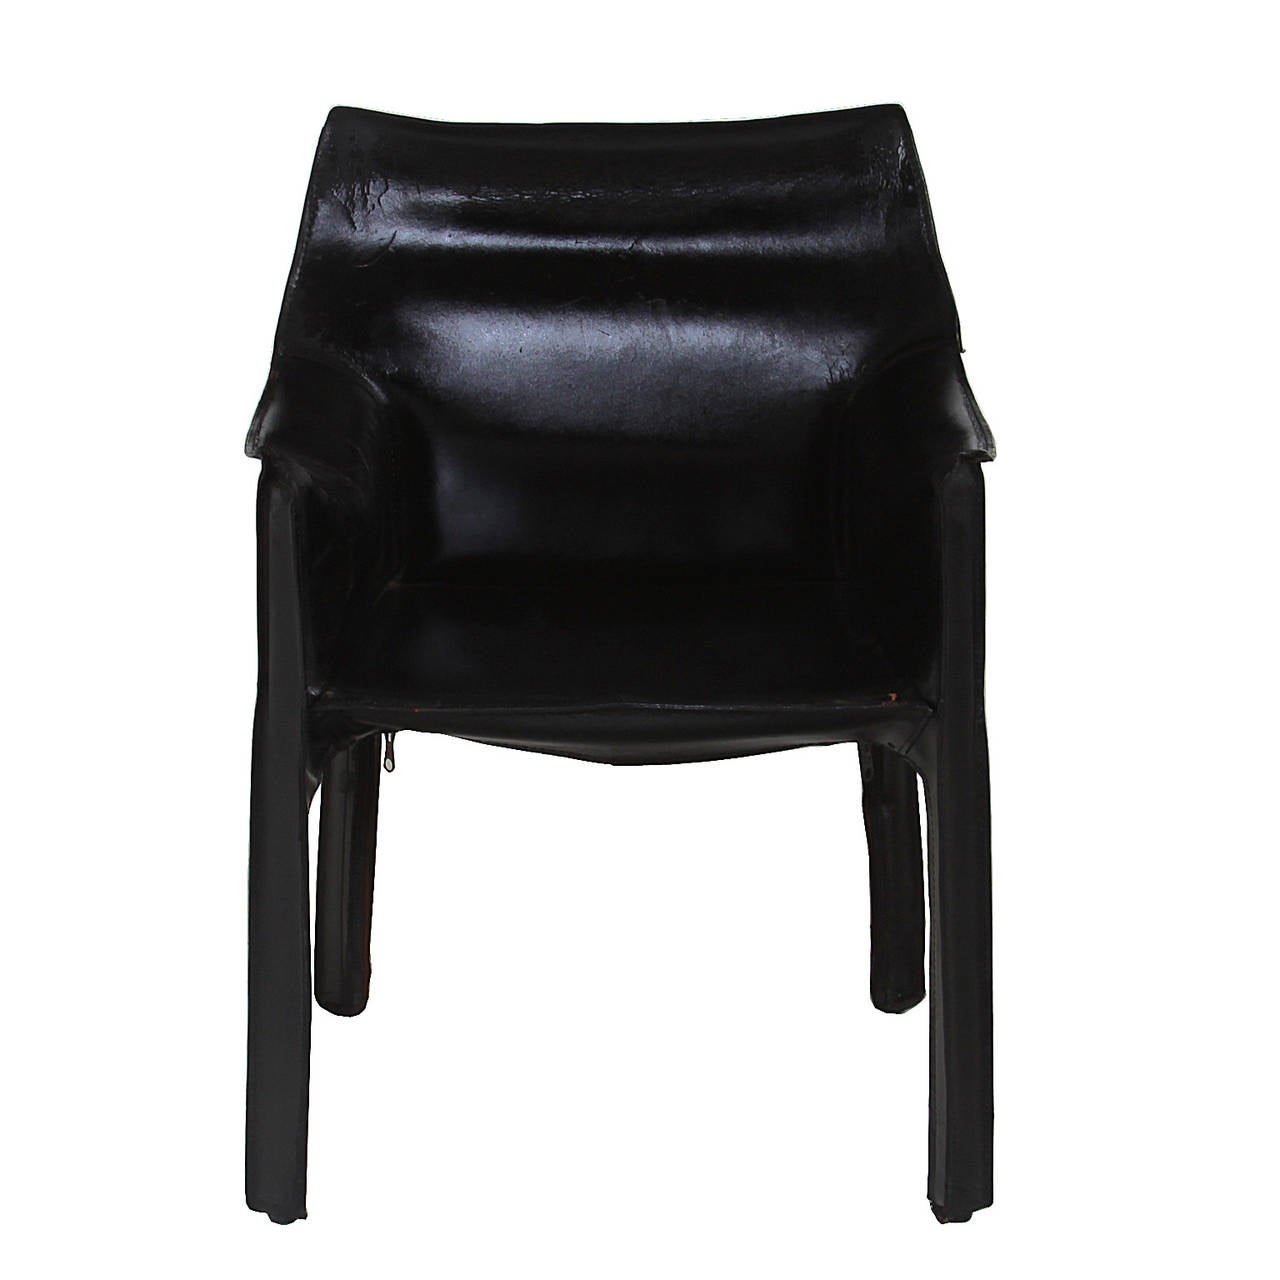 Organic Modern Mario Bellini Cab Chairs In Fair Condition For Sale In Los Angeles, CA